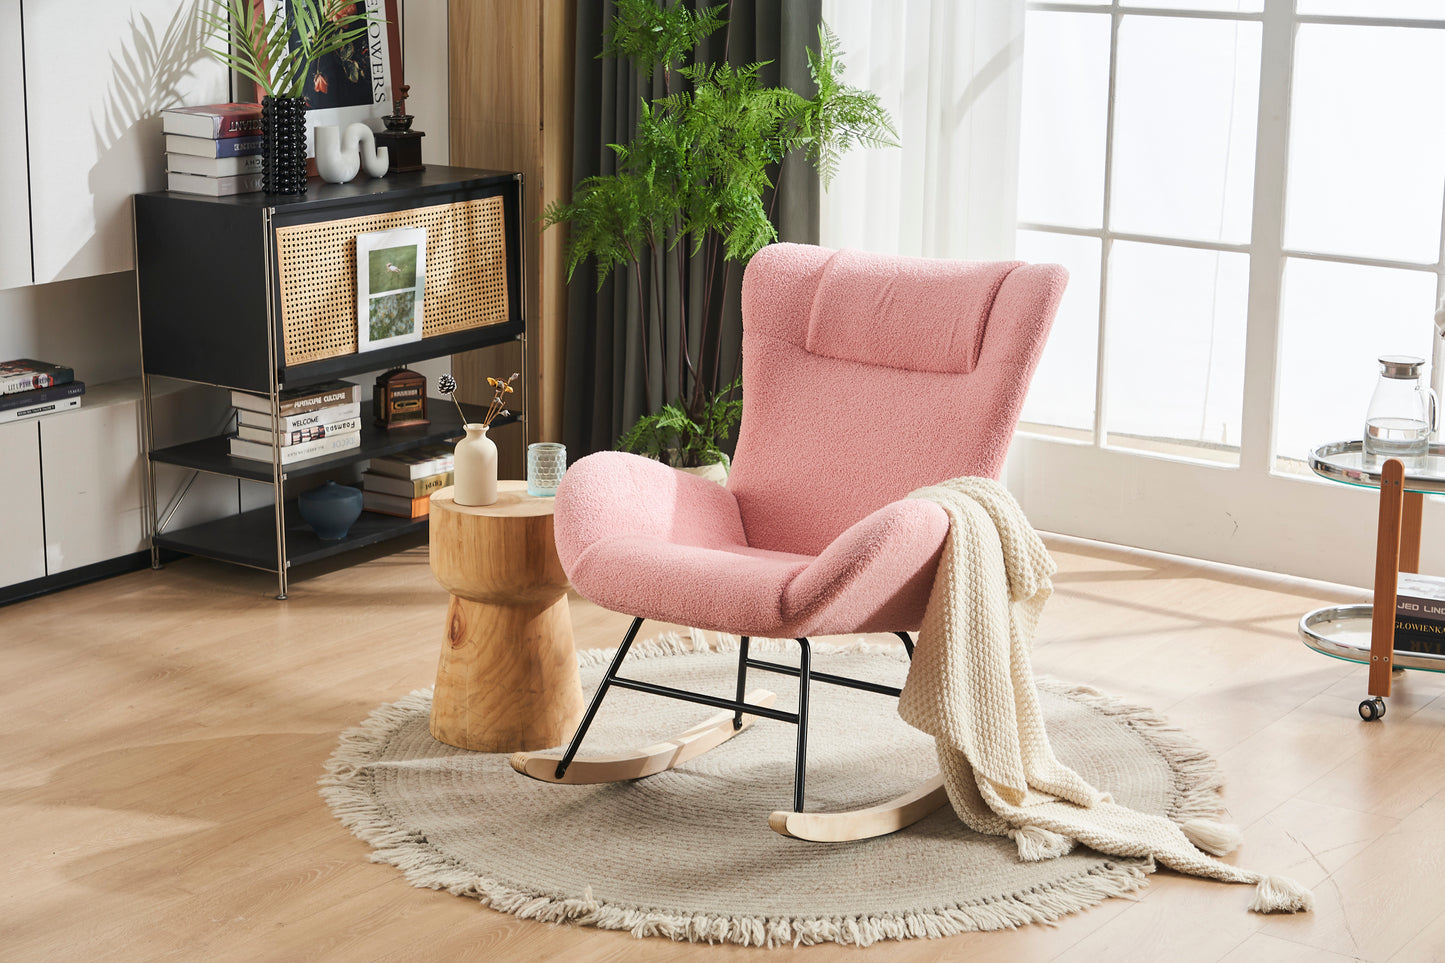 Rocking Chair Nursery, Solid Wood Legs Reading Chair with Teddy Fabric Upholstered , Nap Armchair for Living Rooms, Bedrooms, Offices, Best Gift,Pink Teddy fabric